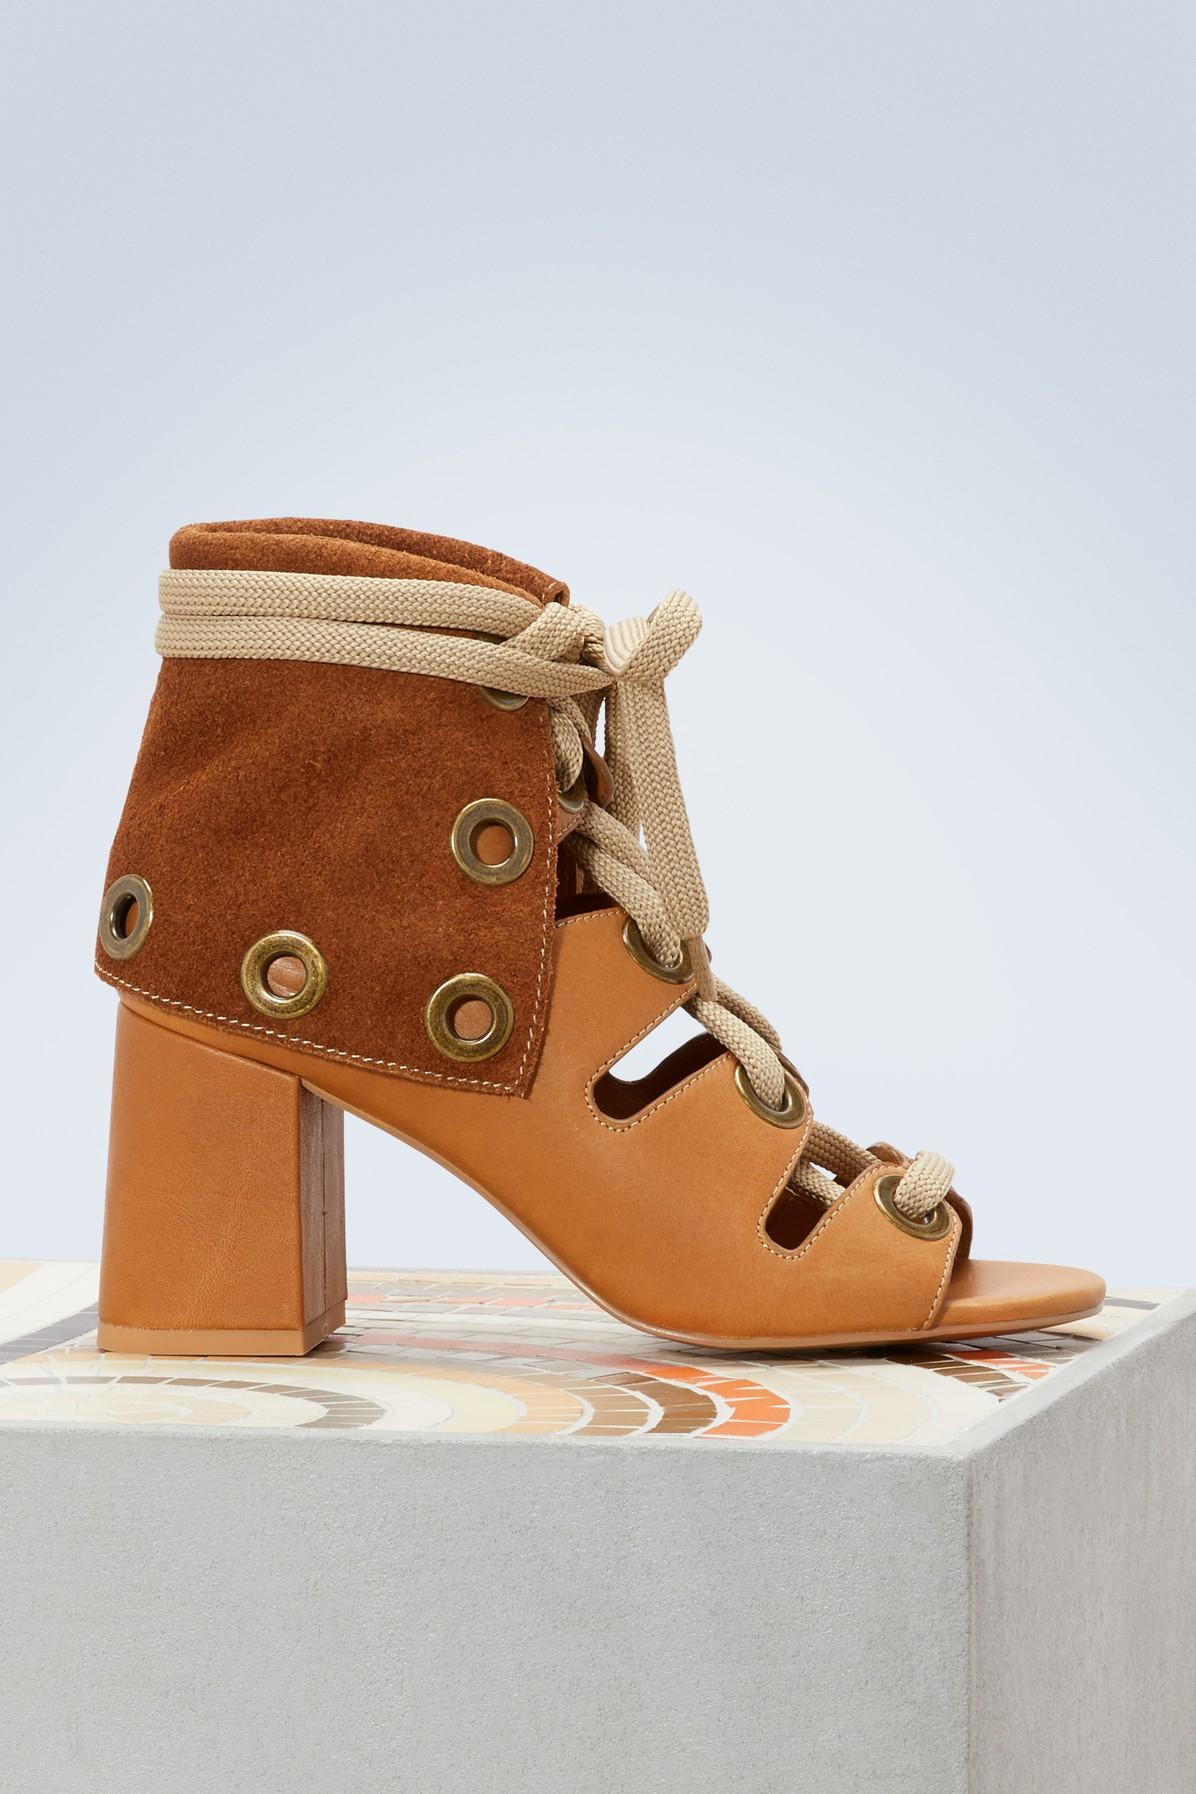 see by chloe gladiator sandals